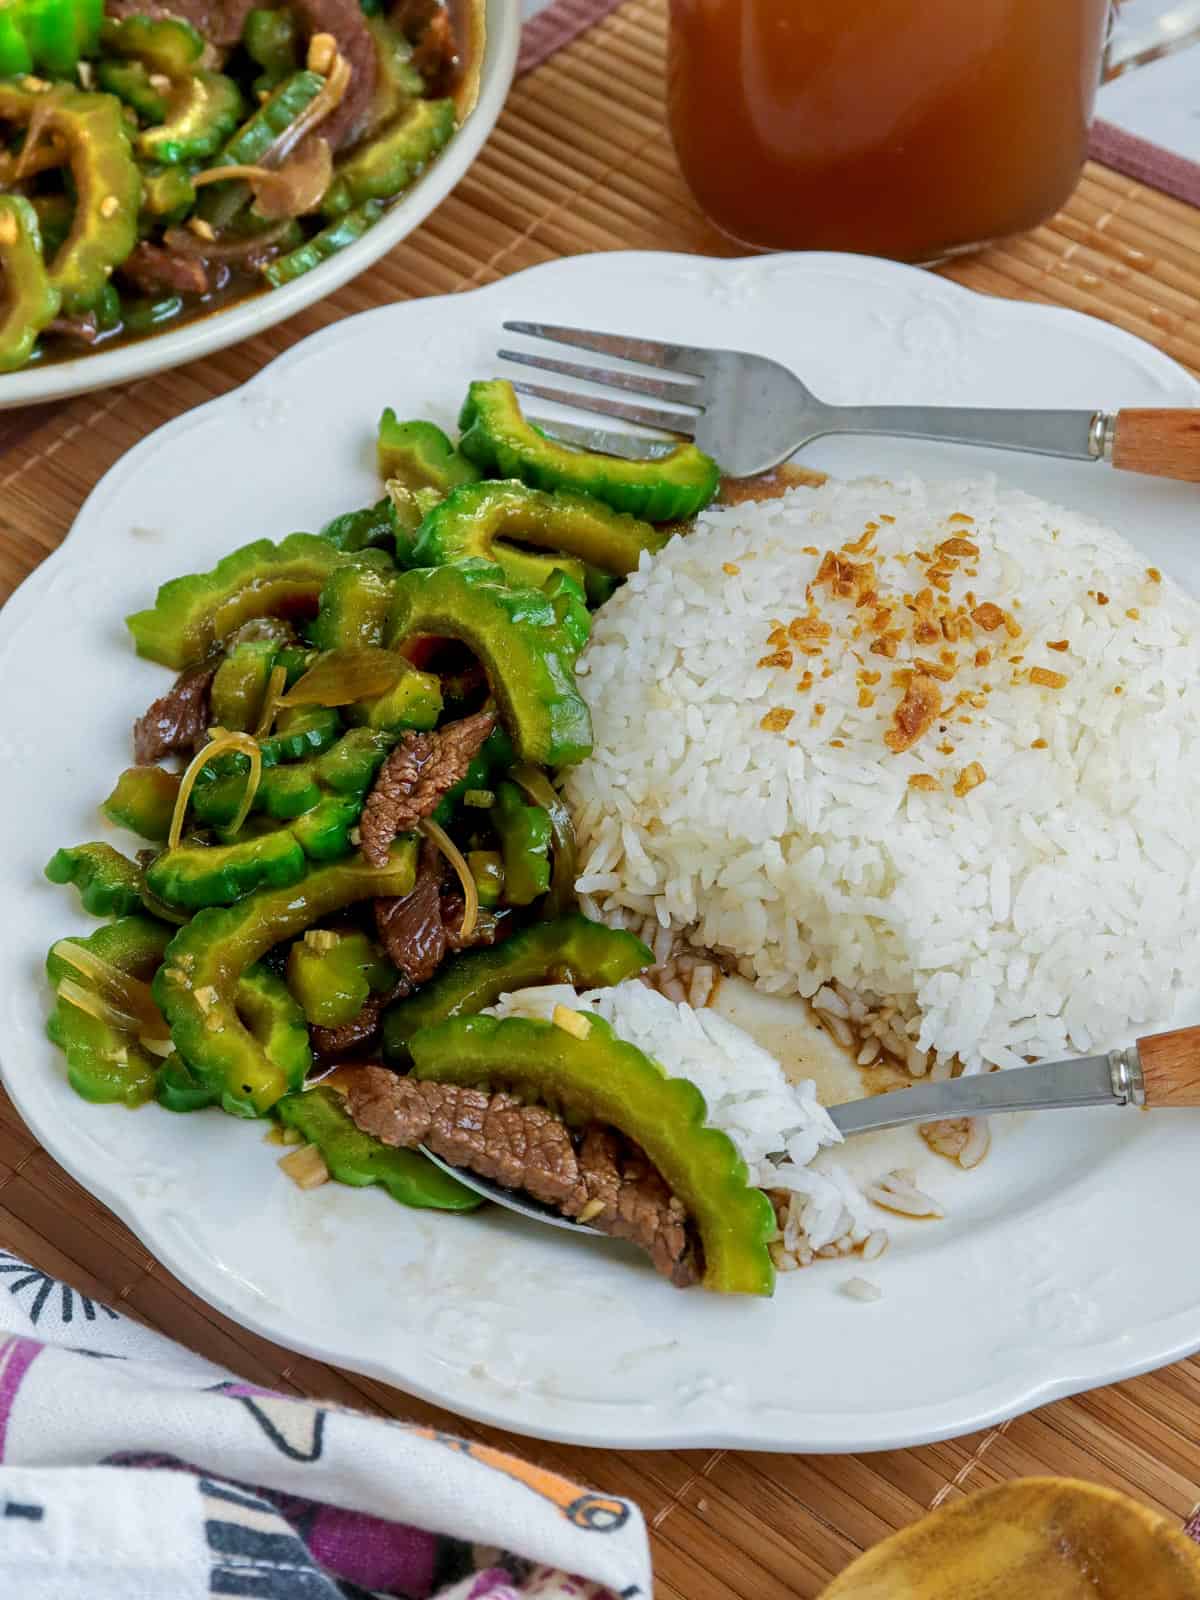 bittermelon and beef stir fry with steamed rice on a white plate.